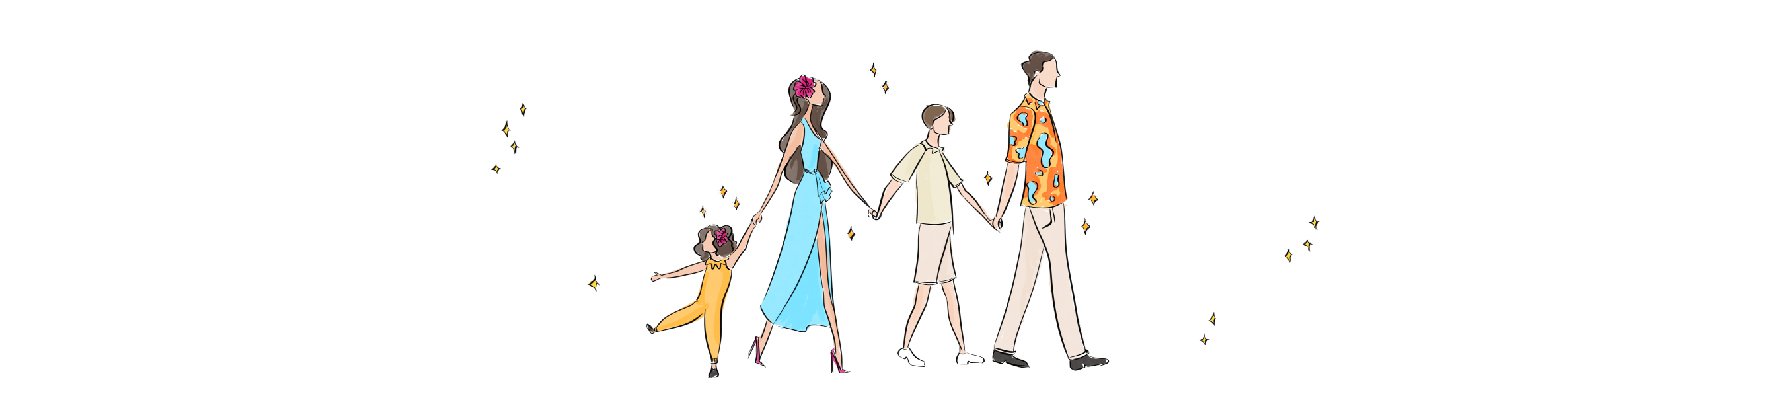 family walking to together on an adventure